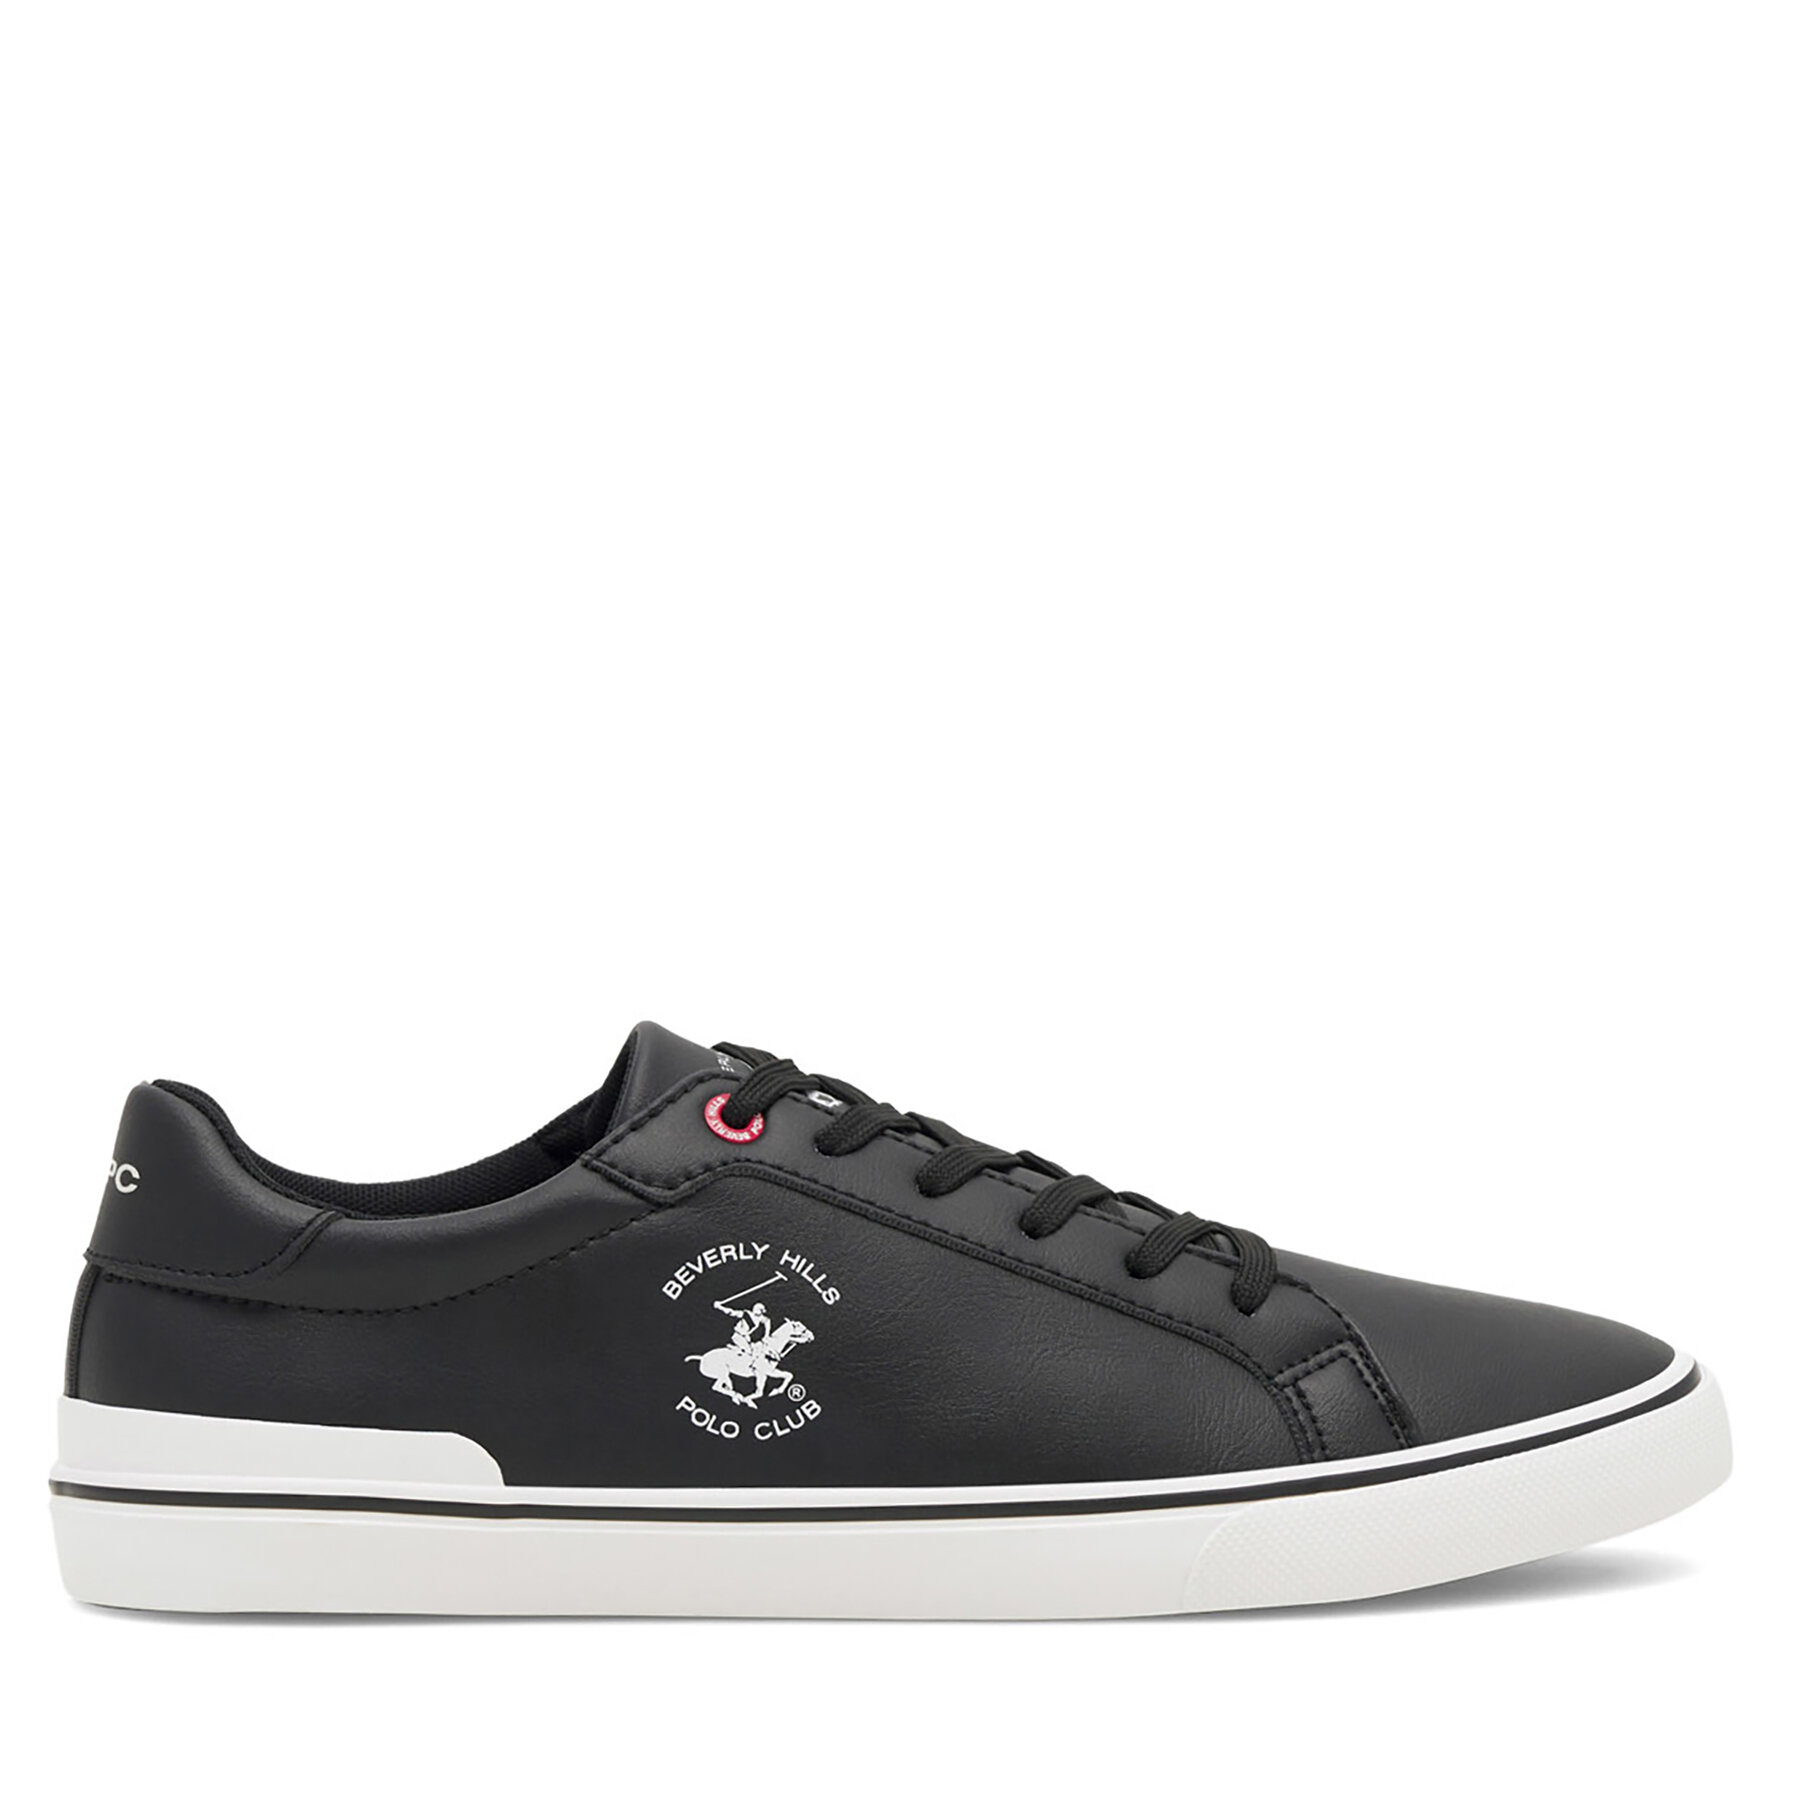 Sneakers aus Stoff Beverly Hills Polo Club M-24MVS5004 Schwarz von Beverly Hills Polo Club